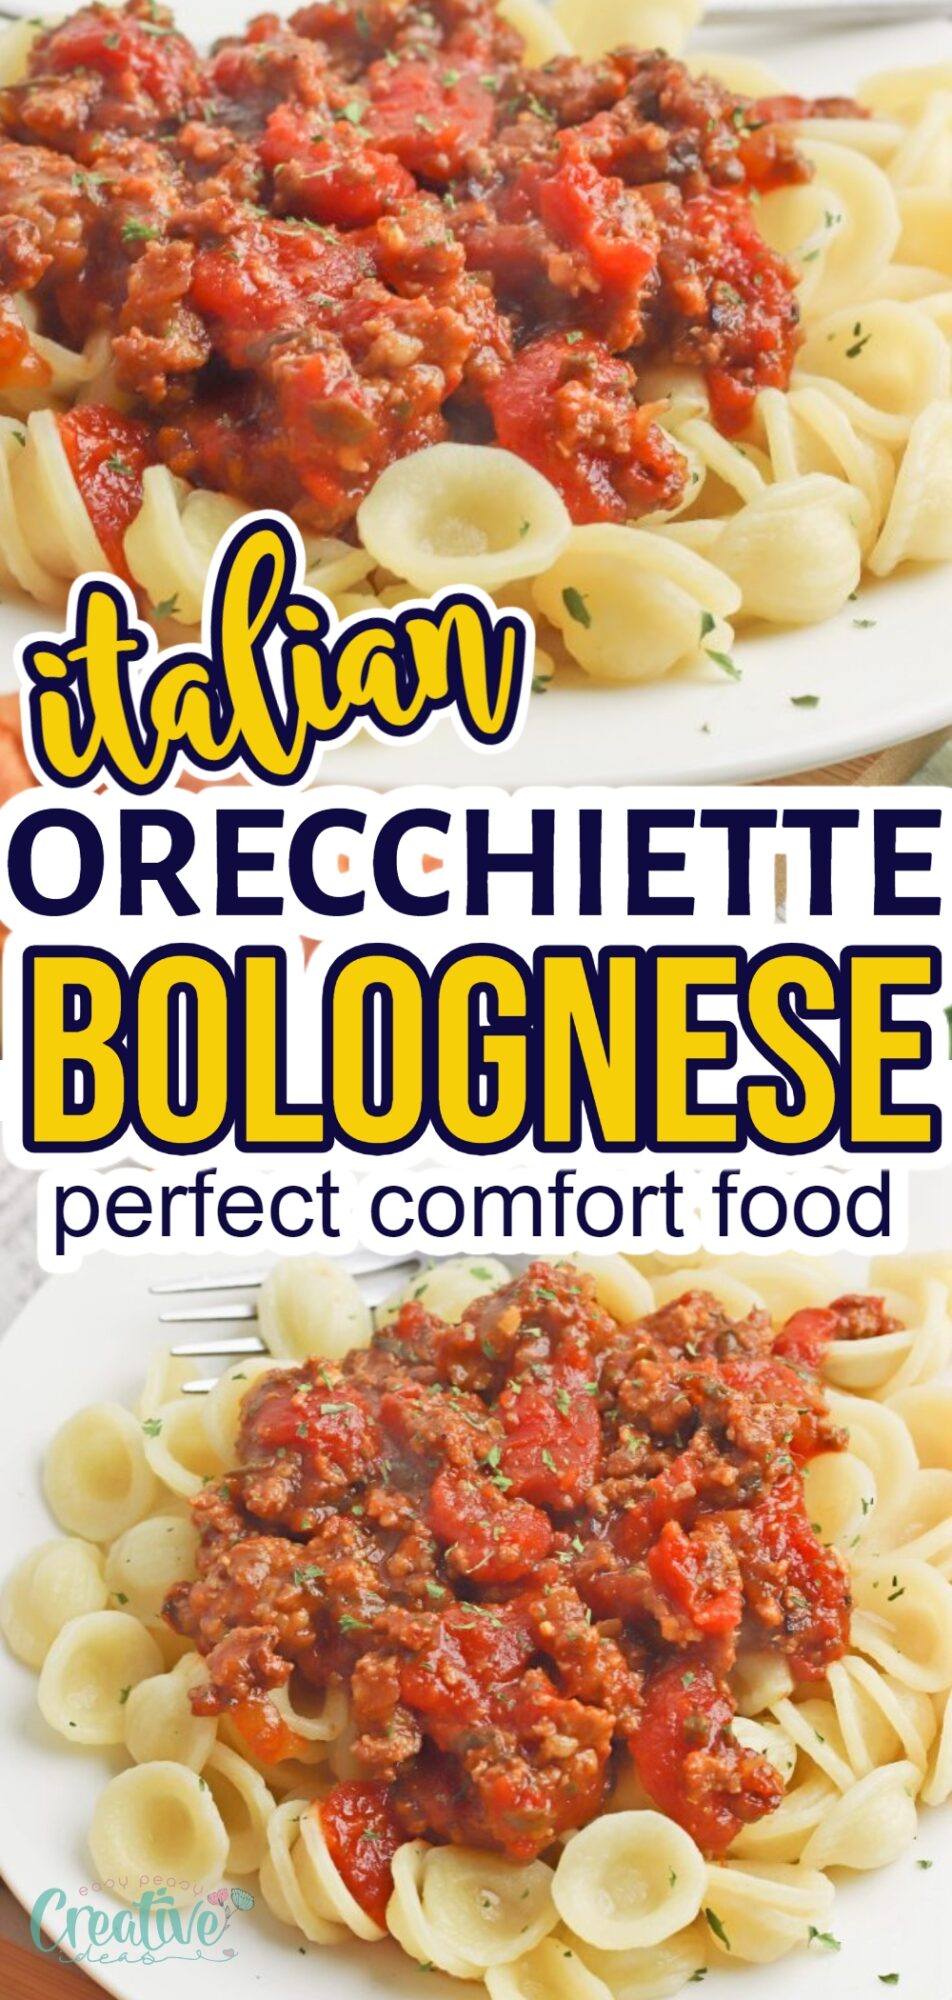 Delicious Italian orecchiette Bolognese, a comforting and hearty pasta dish perfect for satisfying cravings!